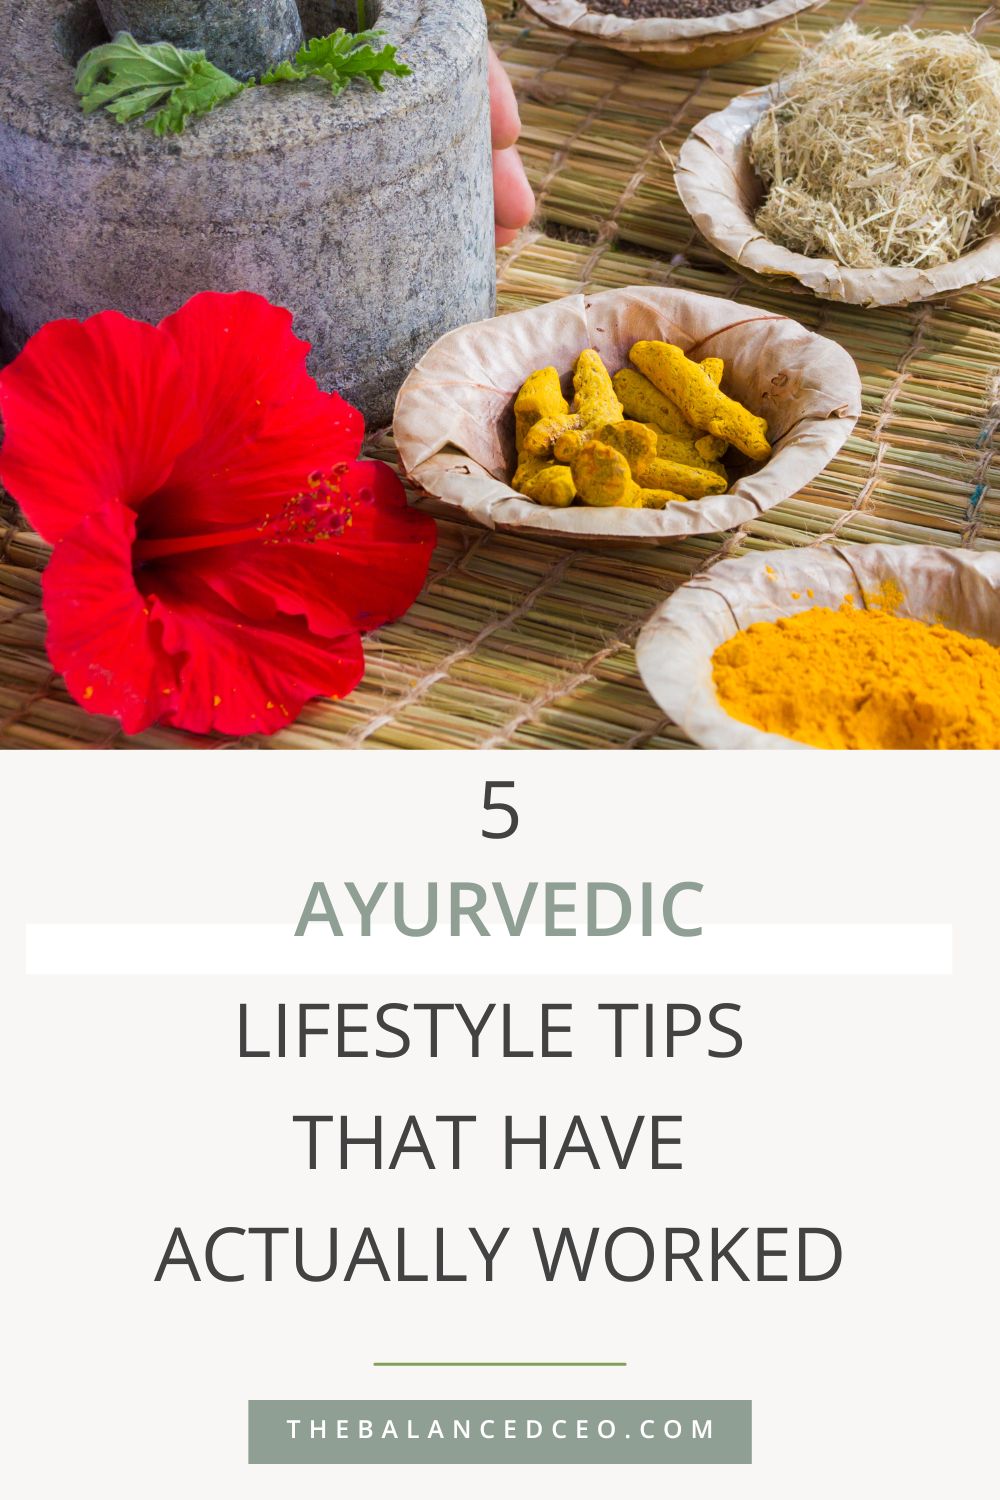 5 Ayurvedic Lifestyle Tips that Have Actually Worked